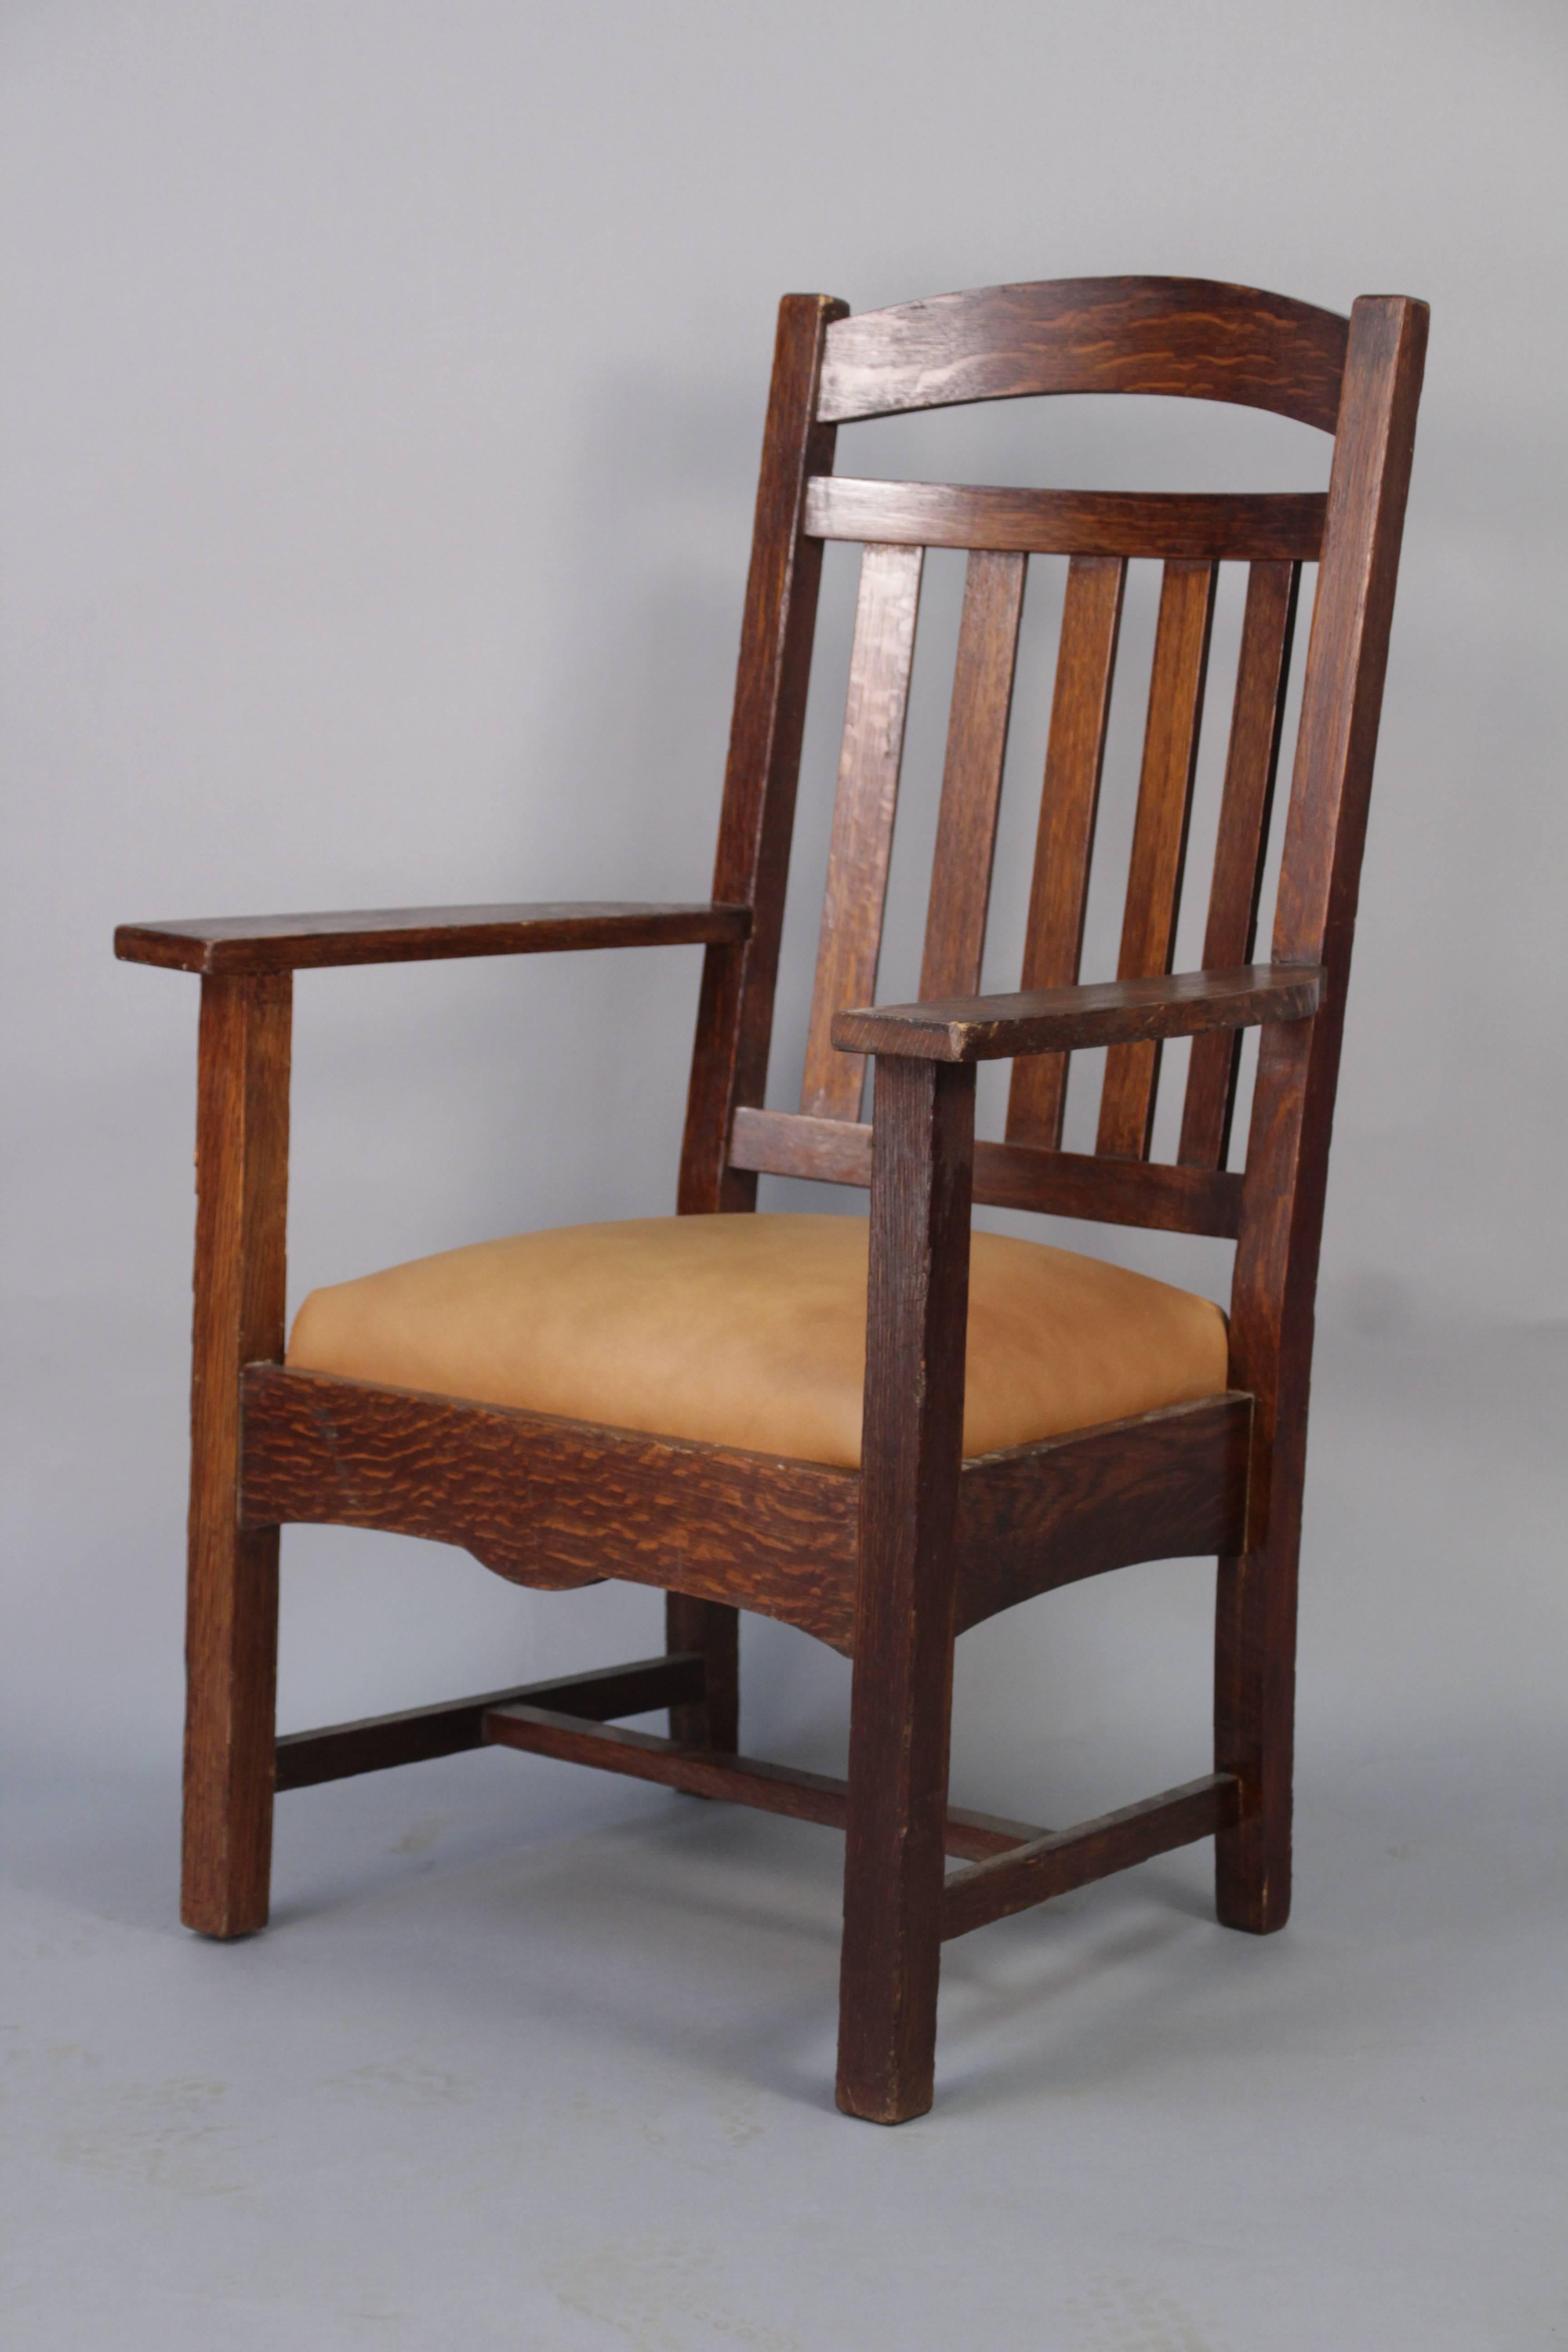 Handsome Arts & Crafts quarter sawn armchair newly upholstered in leather. Stately design.